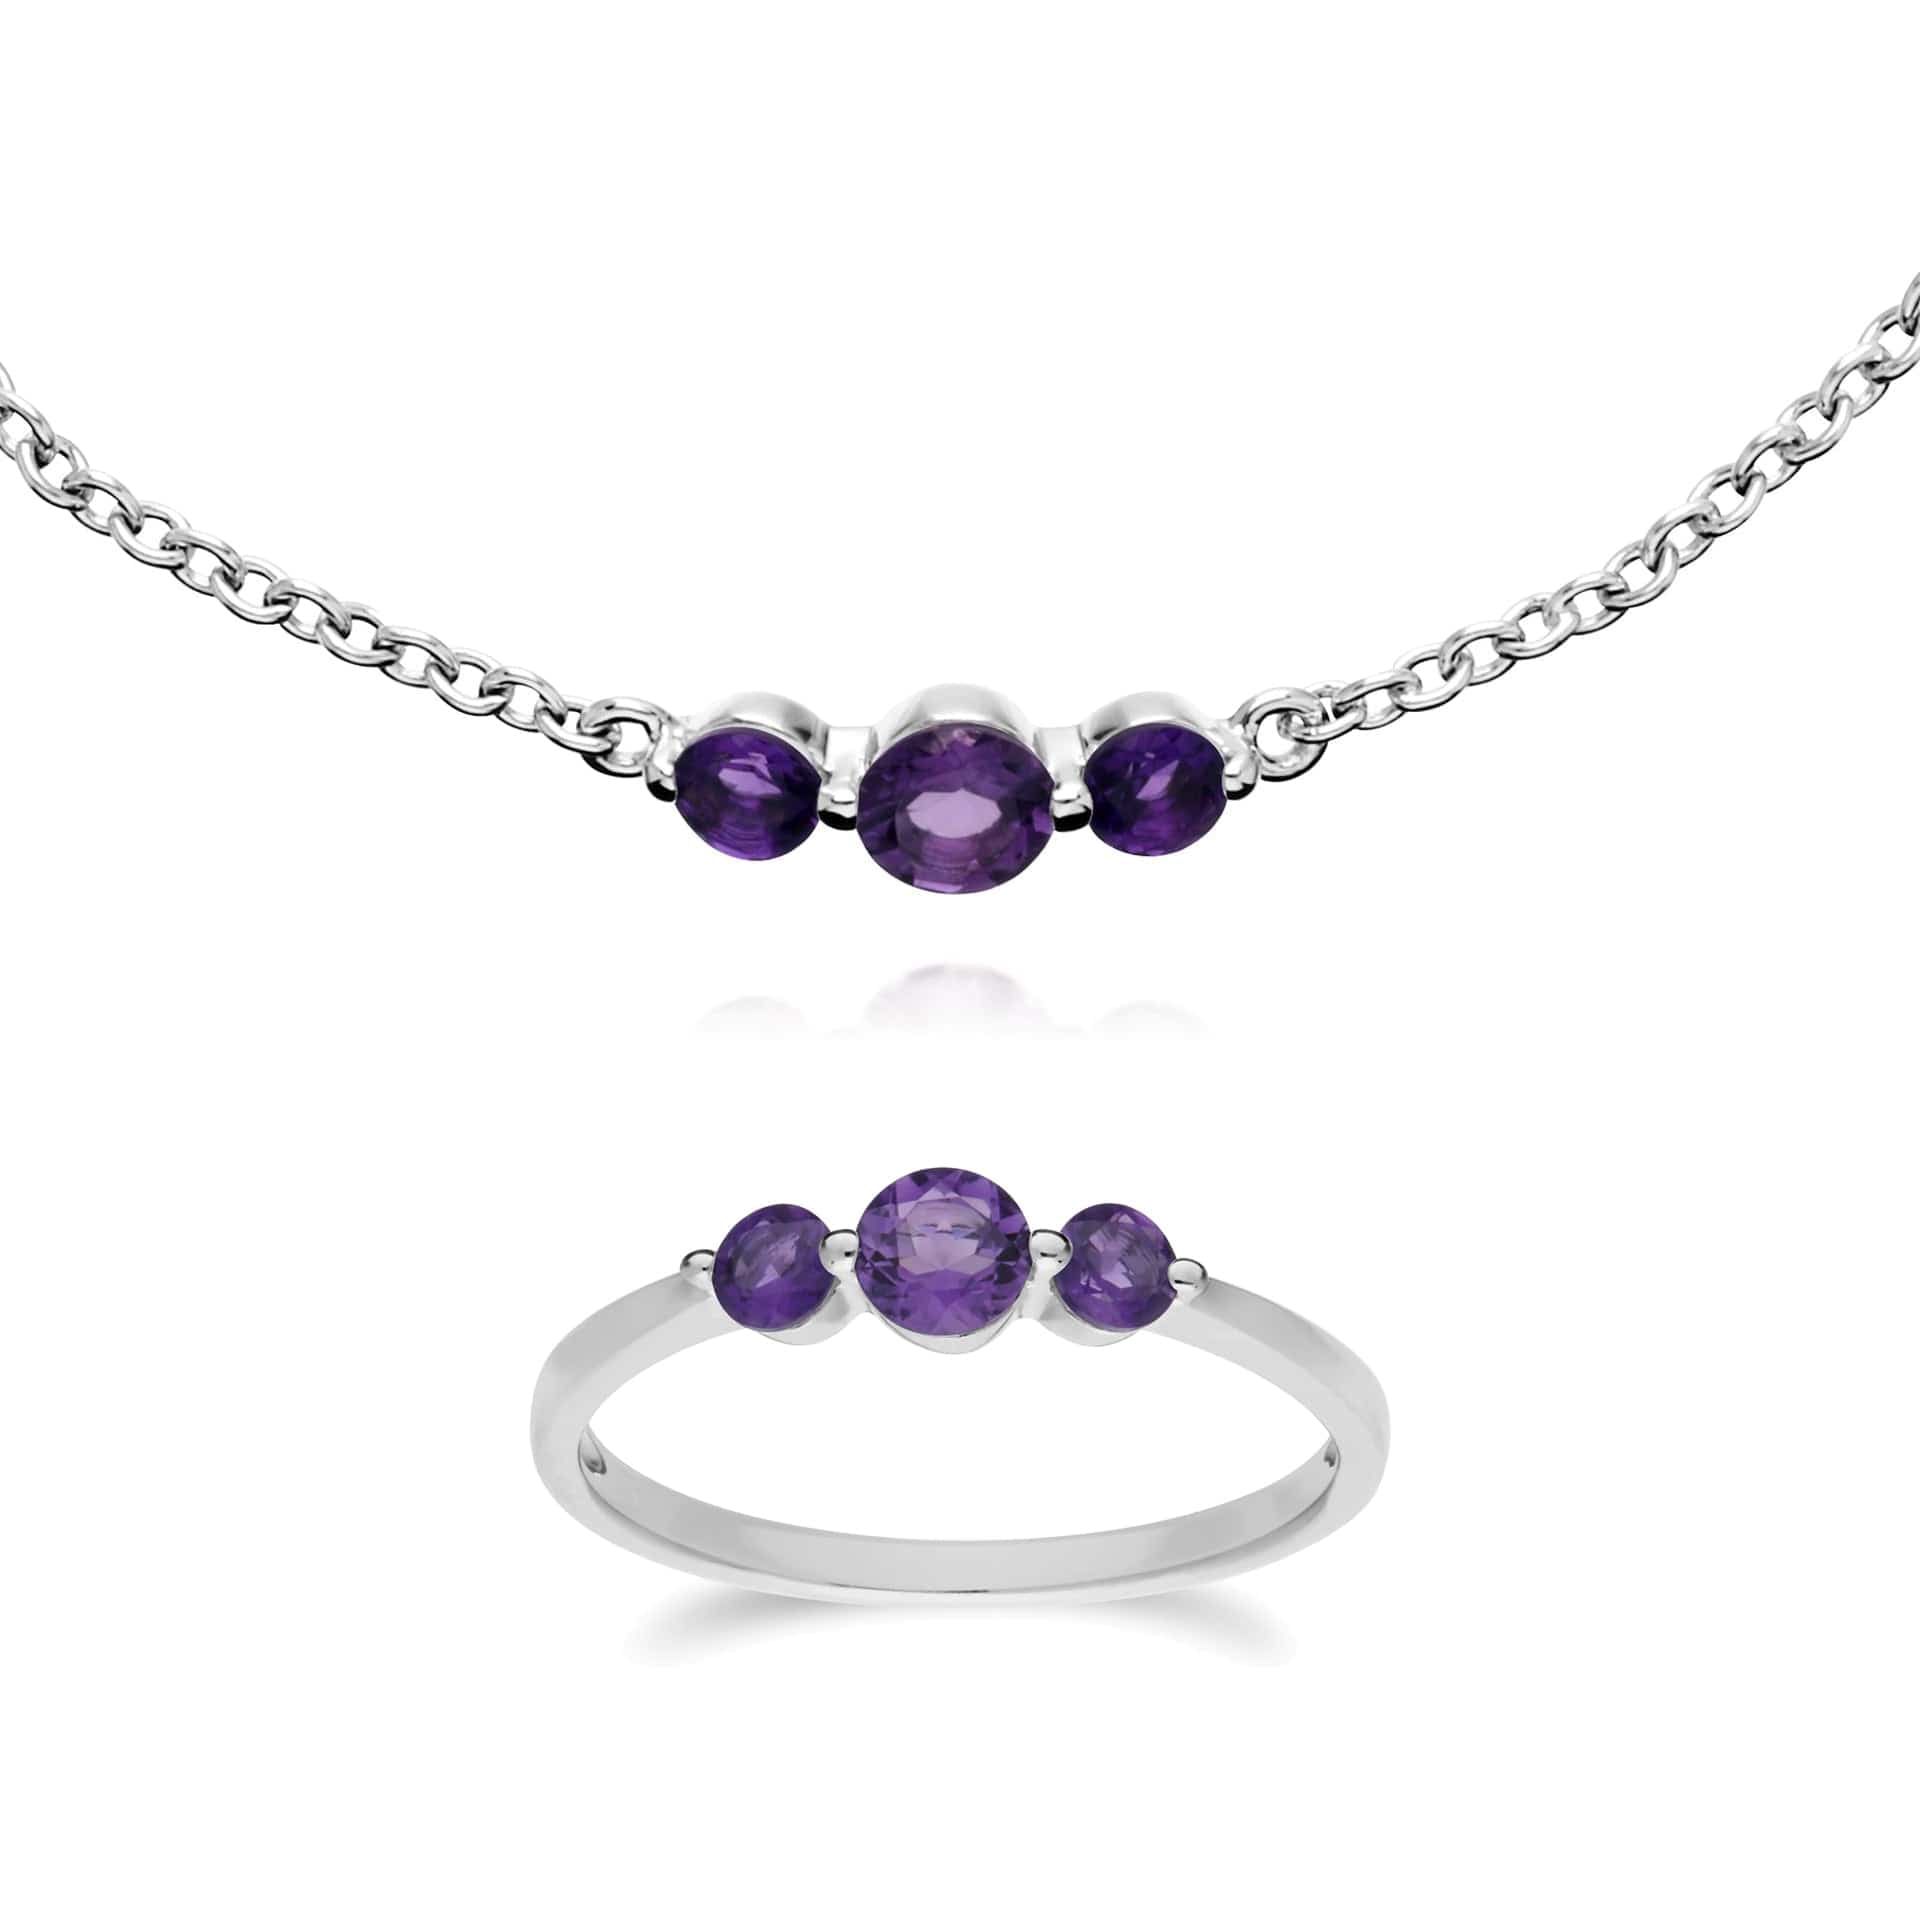 270L011103925-270R056003925 Classic Round Amethyst Three Stone Bracelet & Trilogy Ring Set in 925 Sterling Silver 1